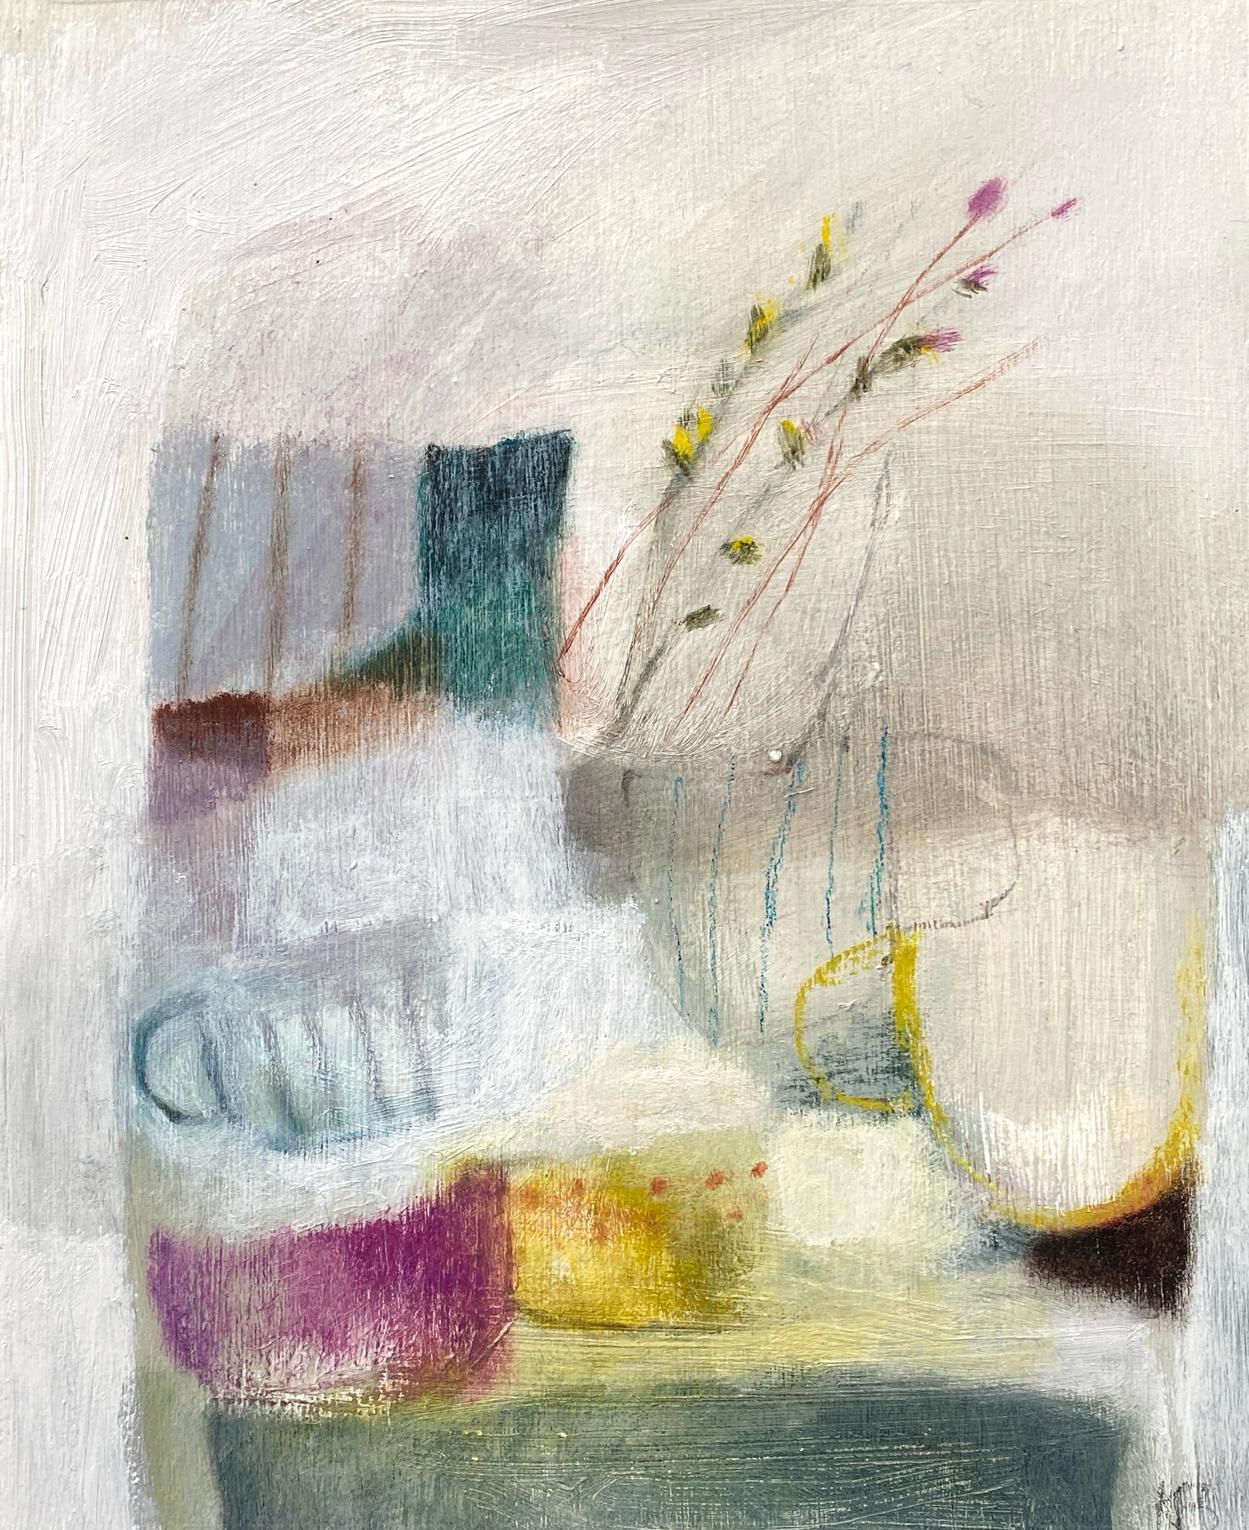 ‘Pink and Yellow Cups’ mixed media and collage on board, by Karen Birchwood, available at Padstow Gallery, Cornwall